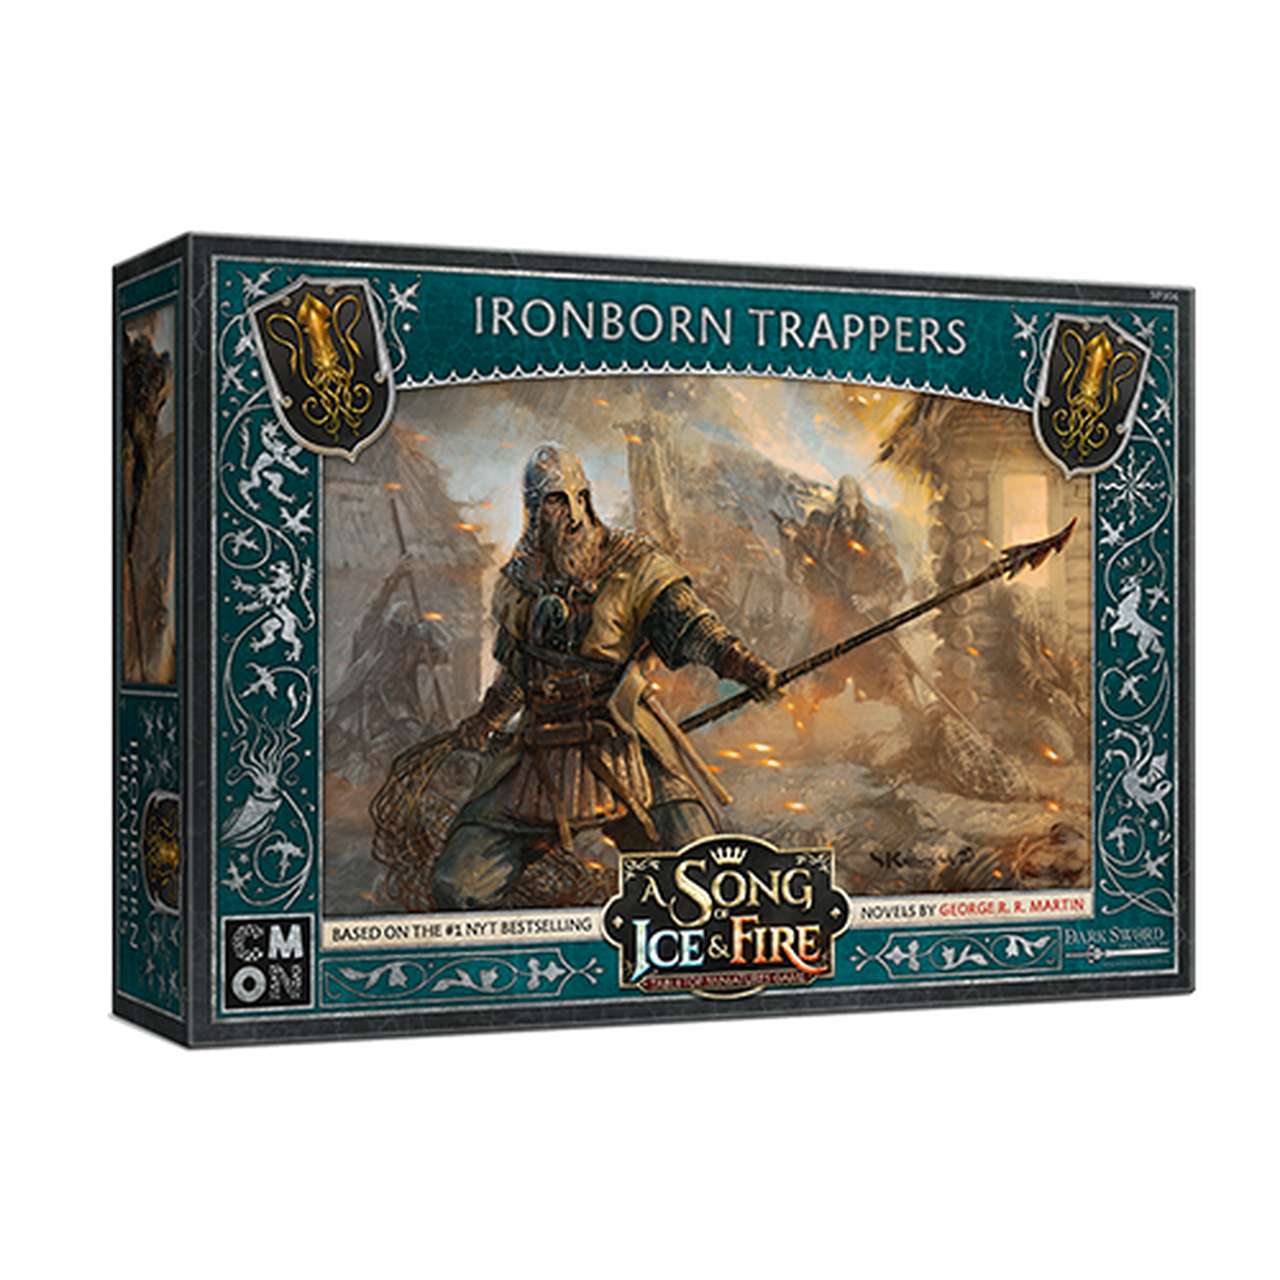 A Song of Ice & Fire - Greyjoy Ironborn Trappers